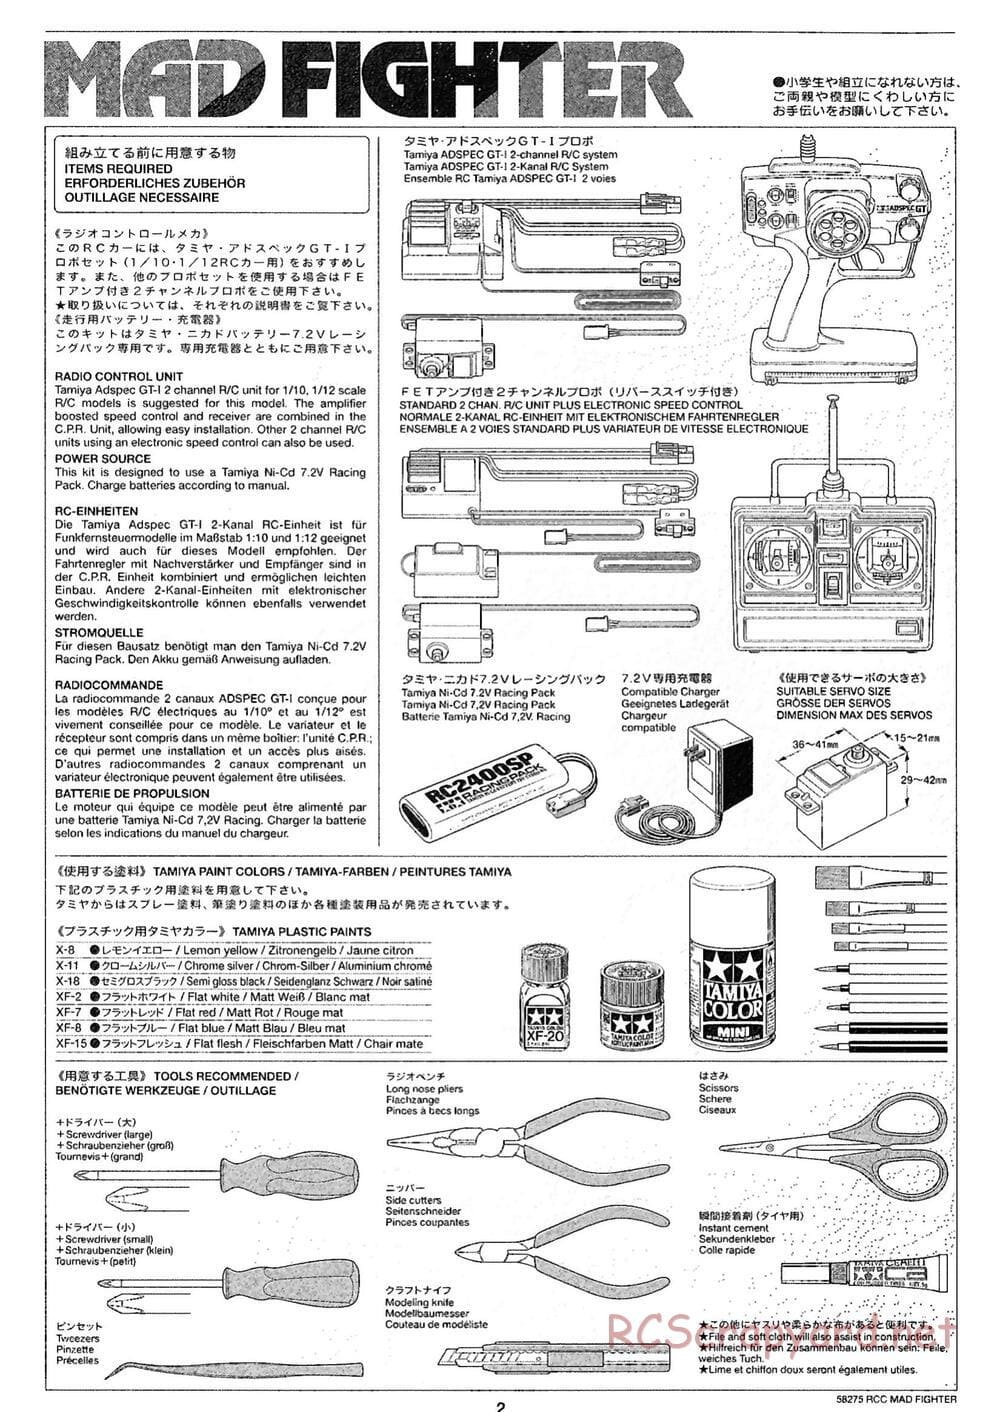 Tamiya - Mad Fighter Chassis - Manual - Page 2